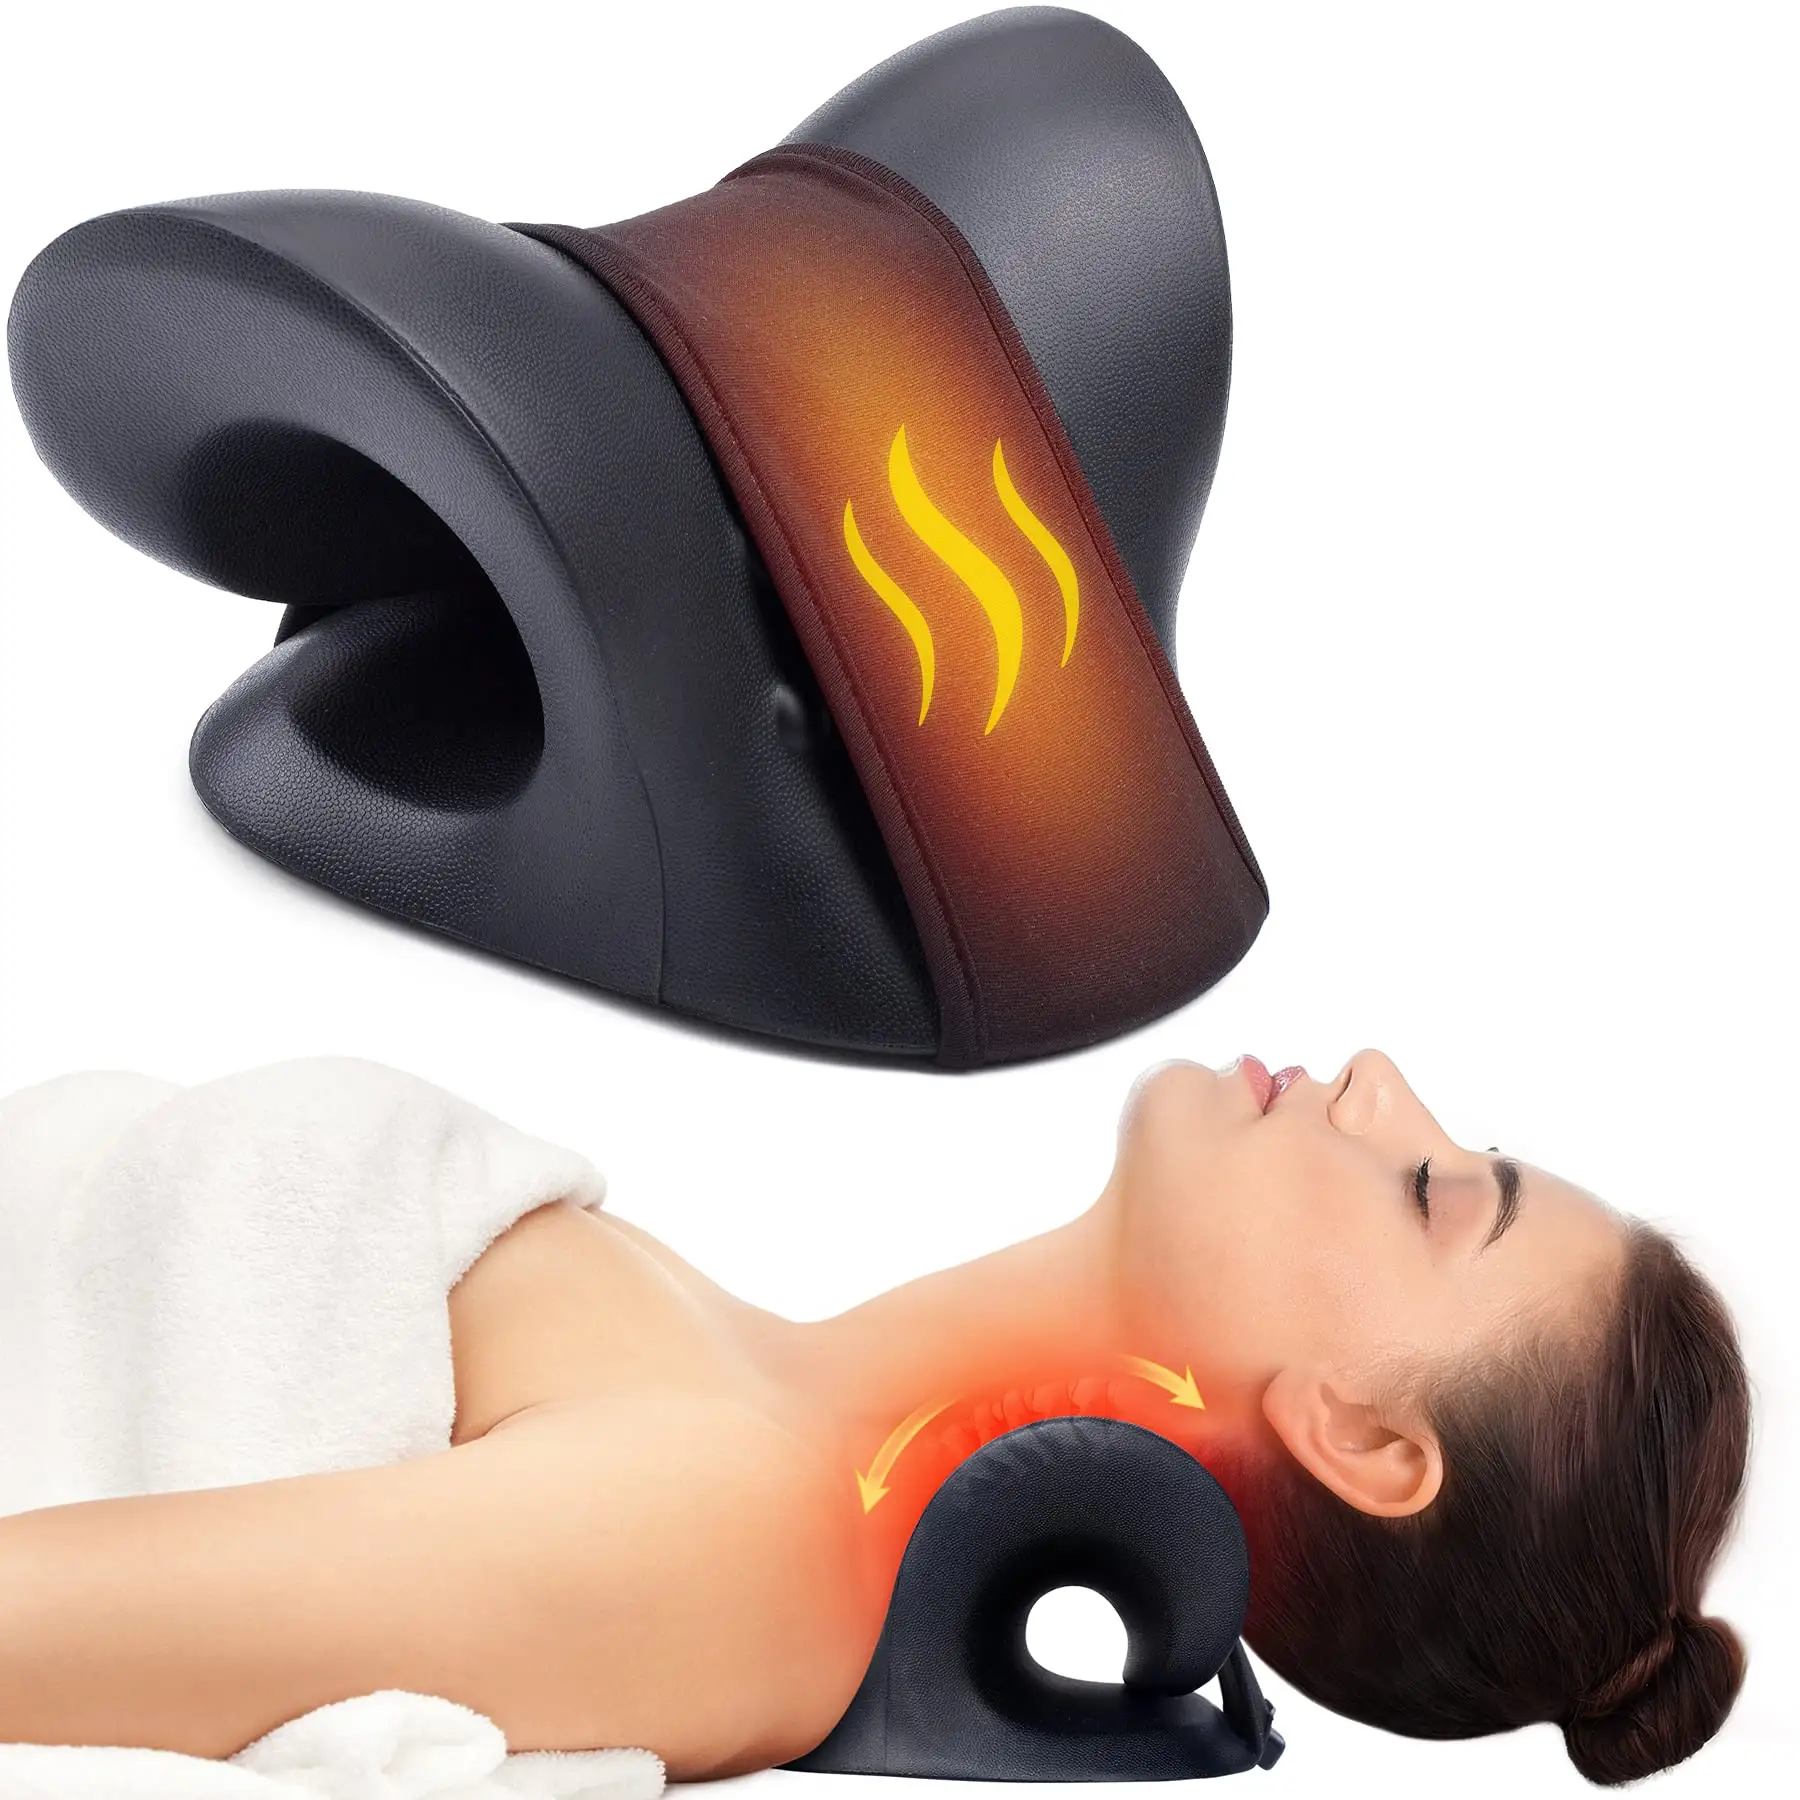 Neck Stretcher Cloud Neck Pain Relief Heated Cervical Traction Device Pillow with Graphene Heating Pad for TMJ Pain Relief